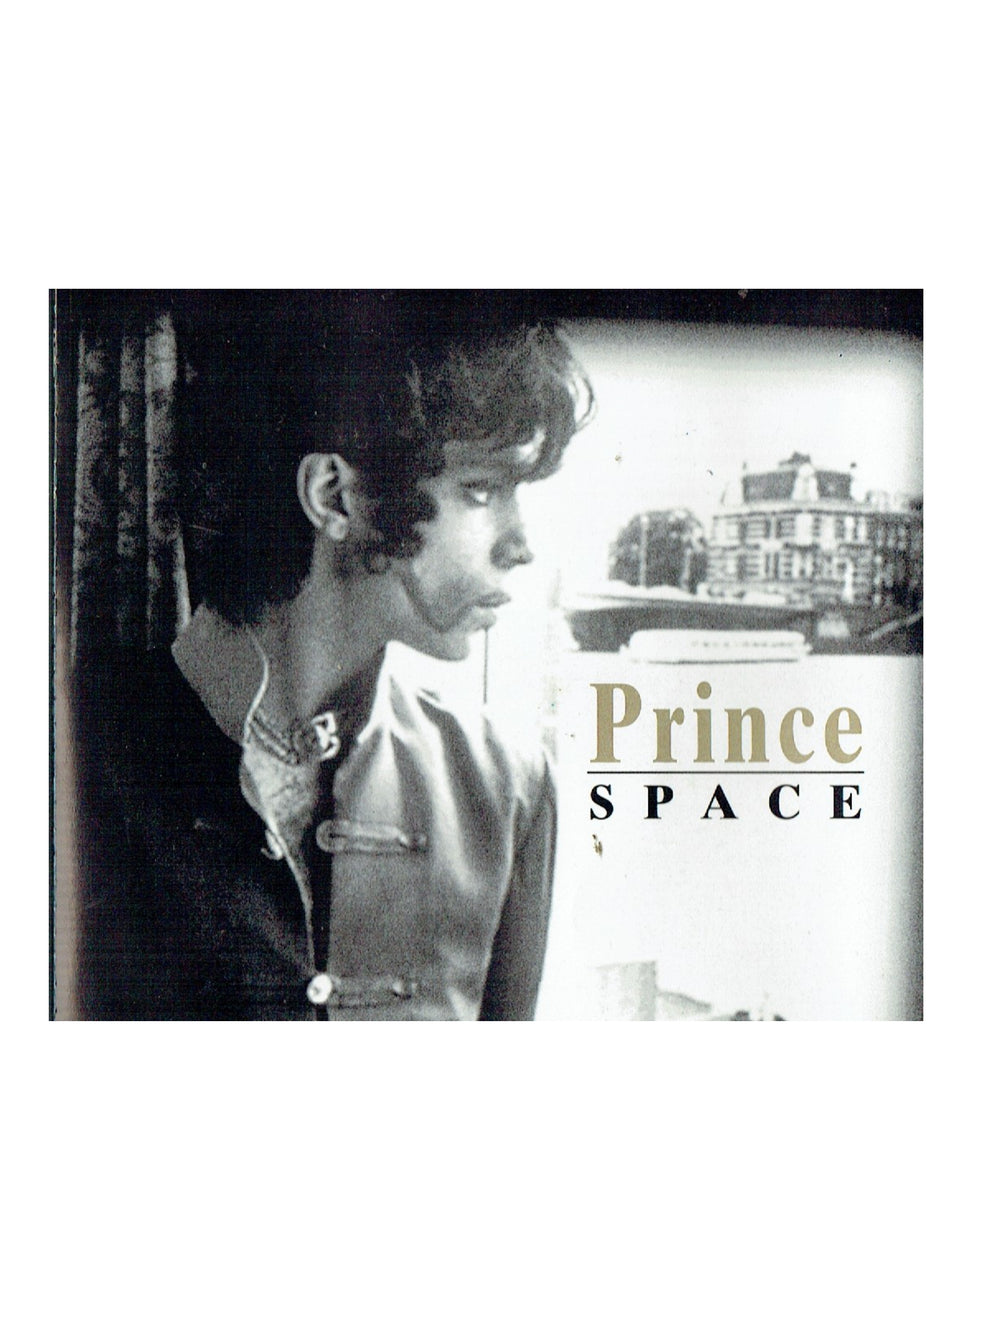 Prince – Space Spanish Only Promotional 3 Track CD Single 1994 Unique Sleeve